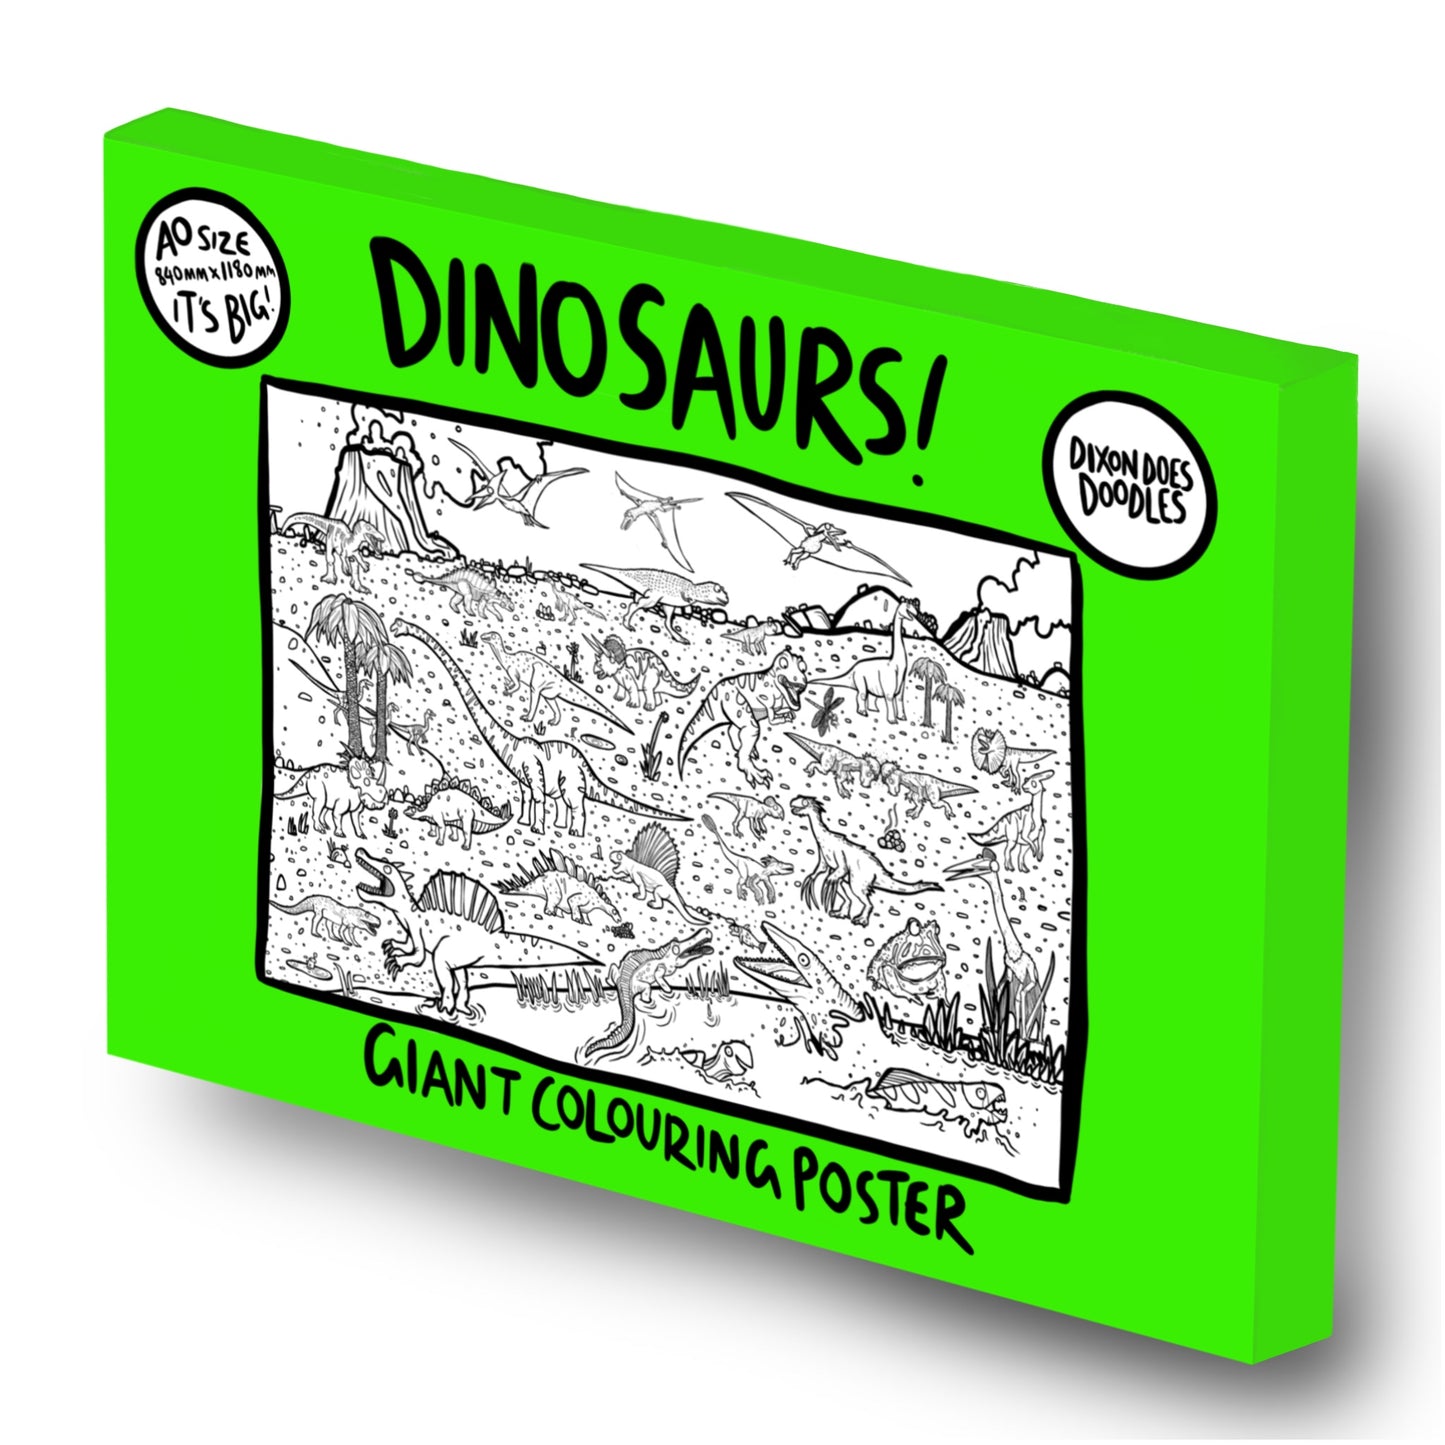 Dinosaurs! Giant Colouring Poster FREE UK postage